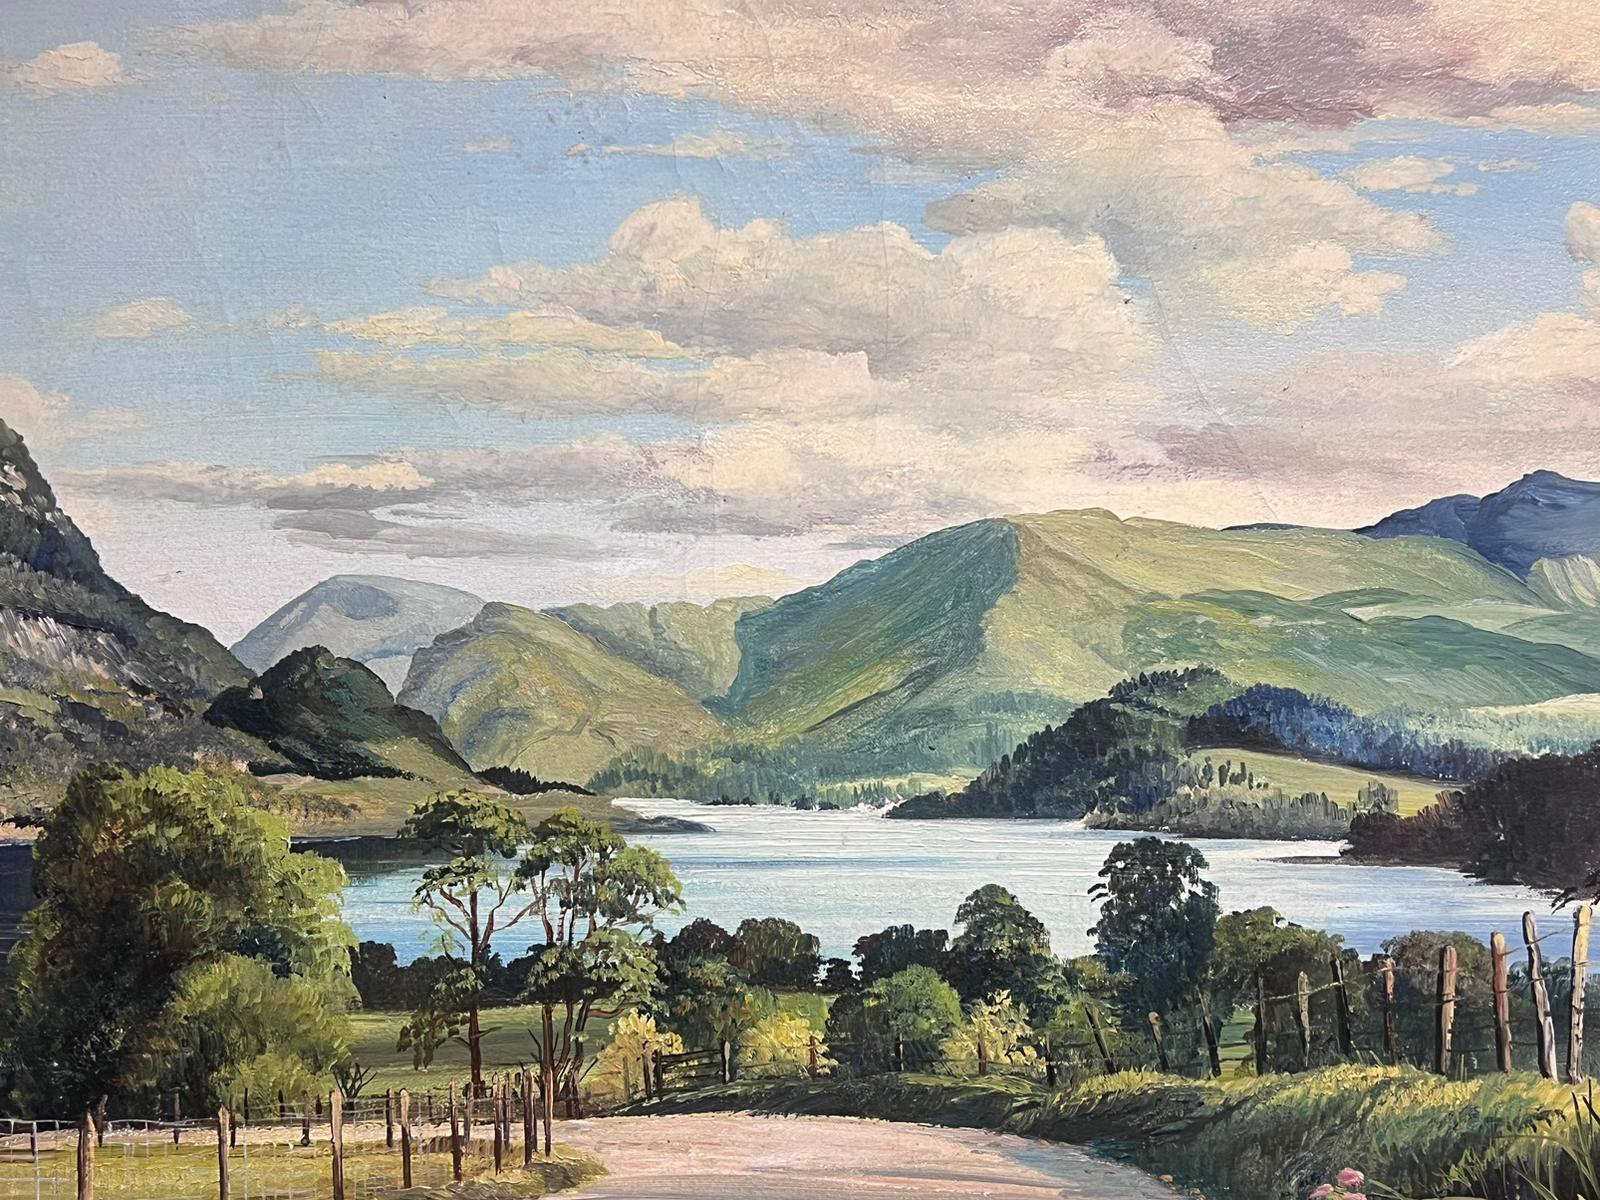 Ullswater The English Lake District Large Signed Vintage Oil Painting on Canvas 5